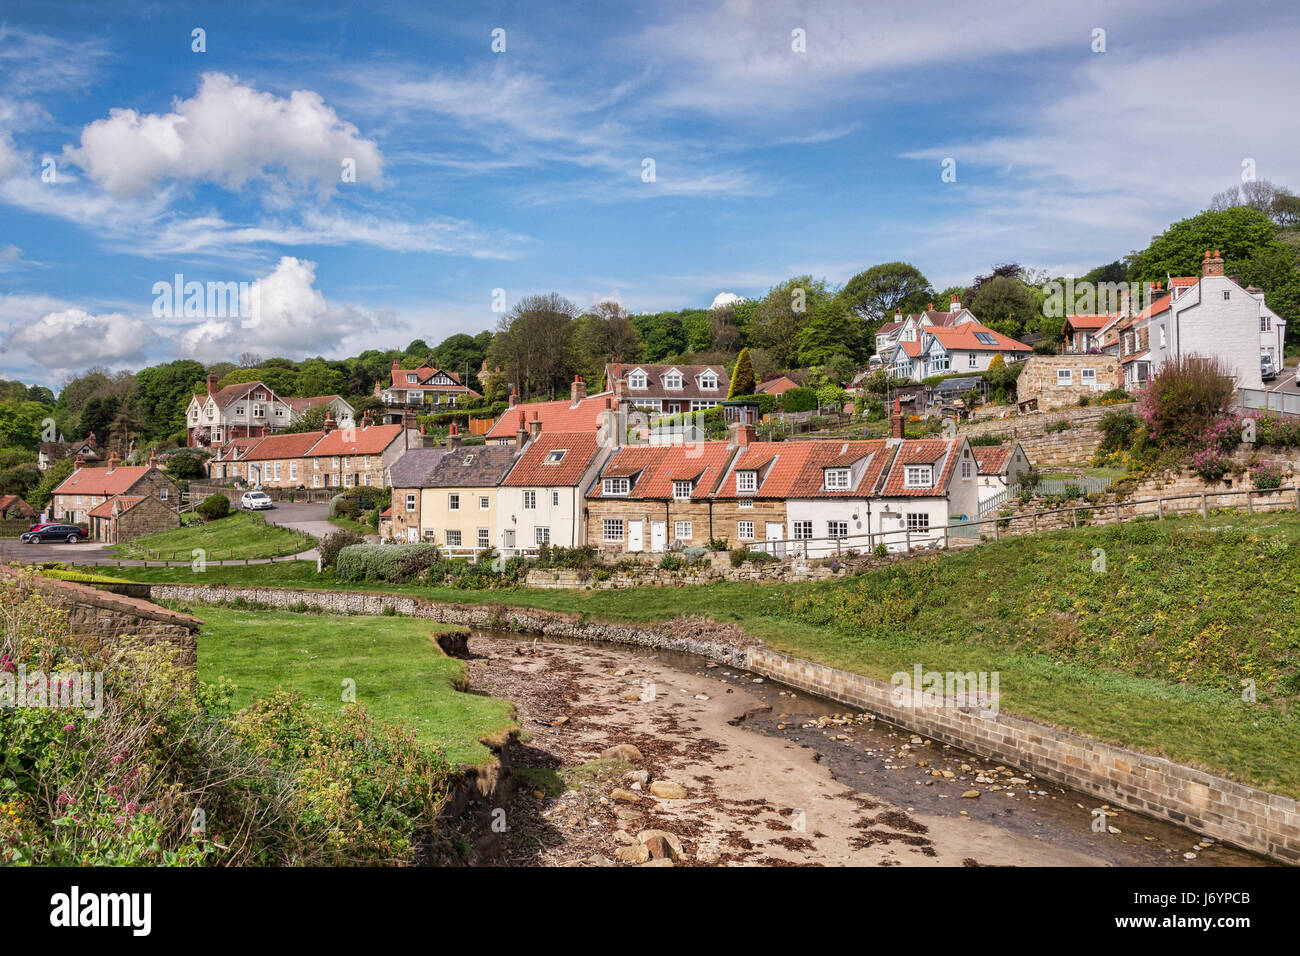 The village of Sandsend, near Whitby, North Yorkshire, England, UK, on a fine spring day with sunshine and blue sky. Stock Photo